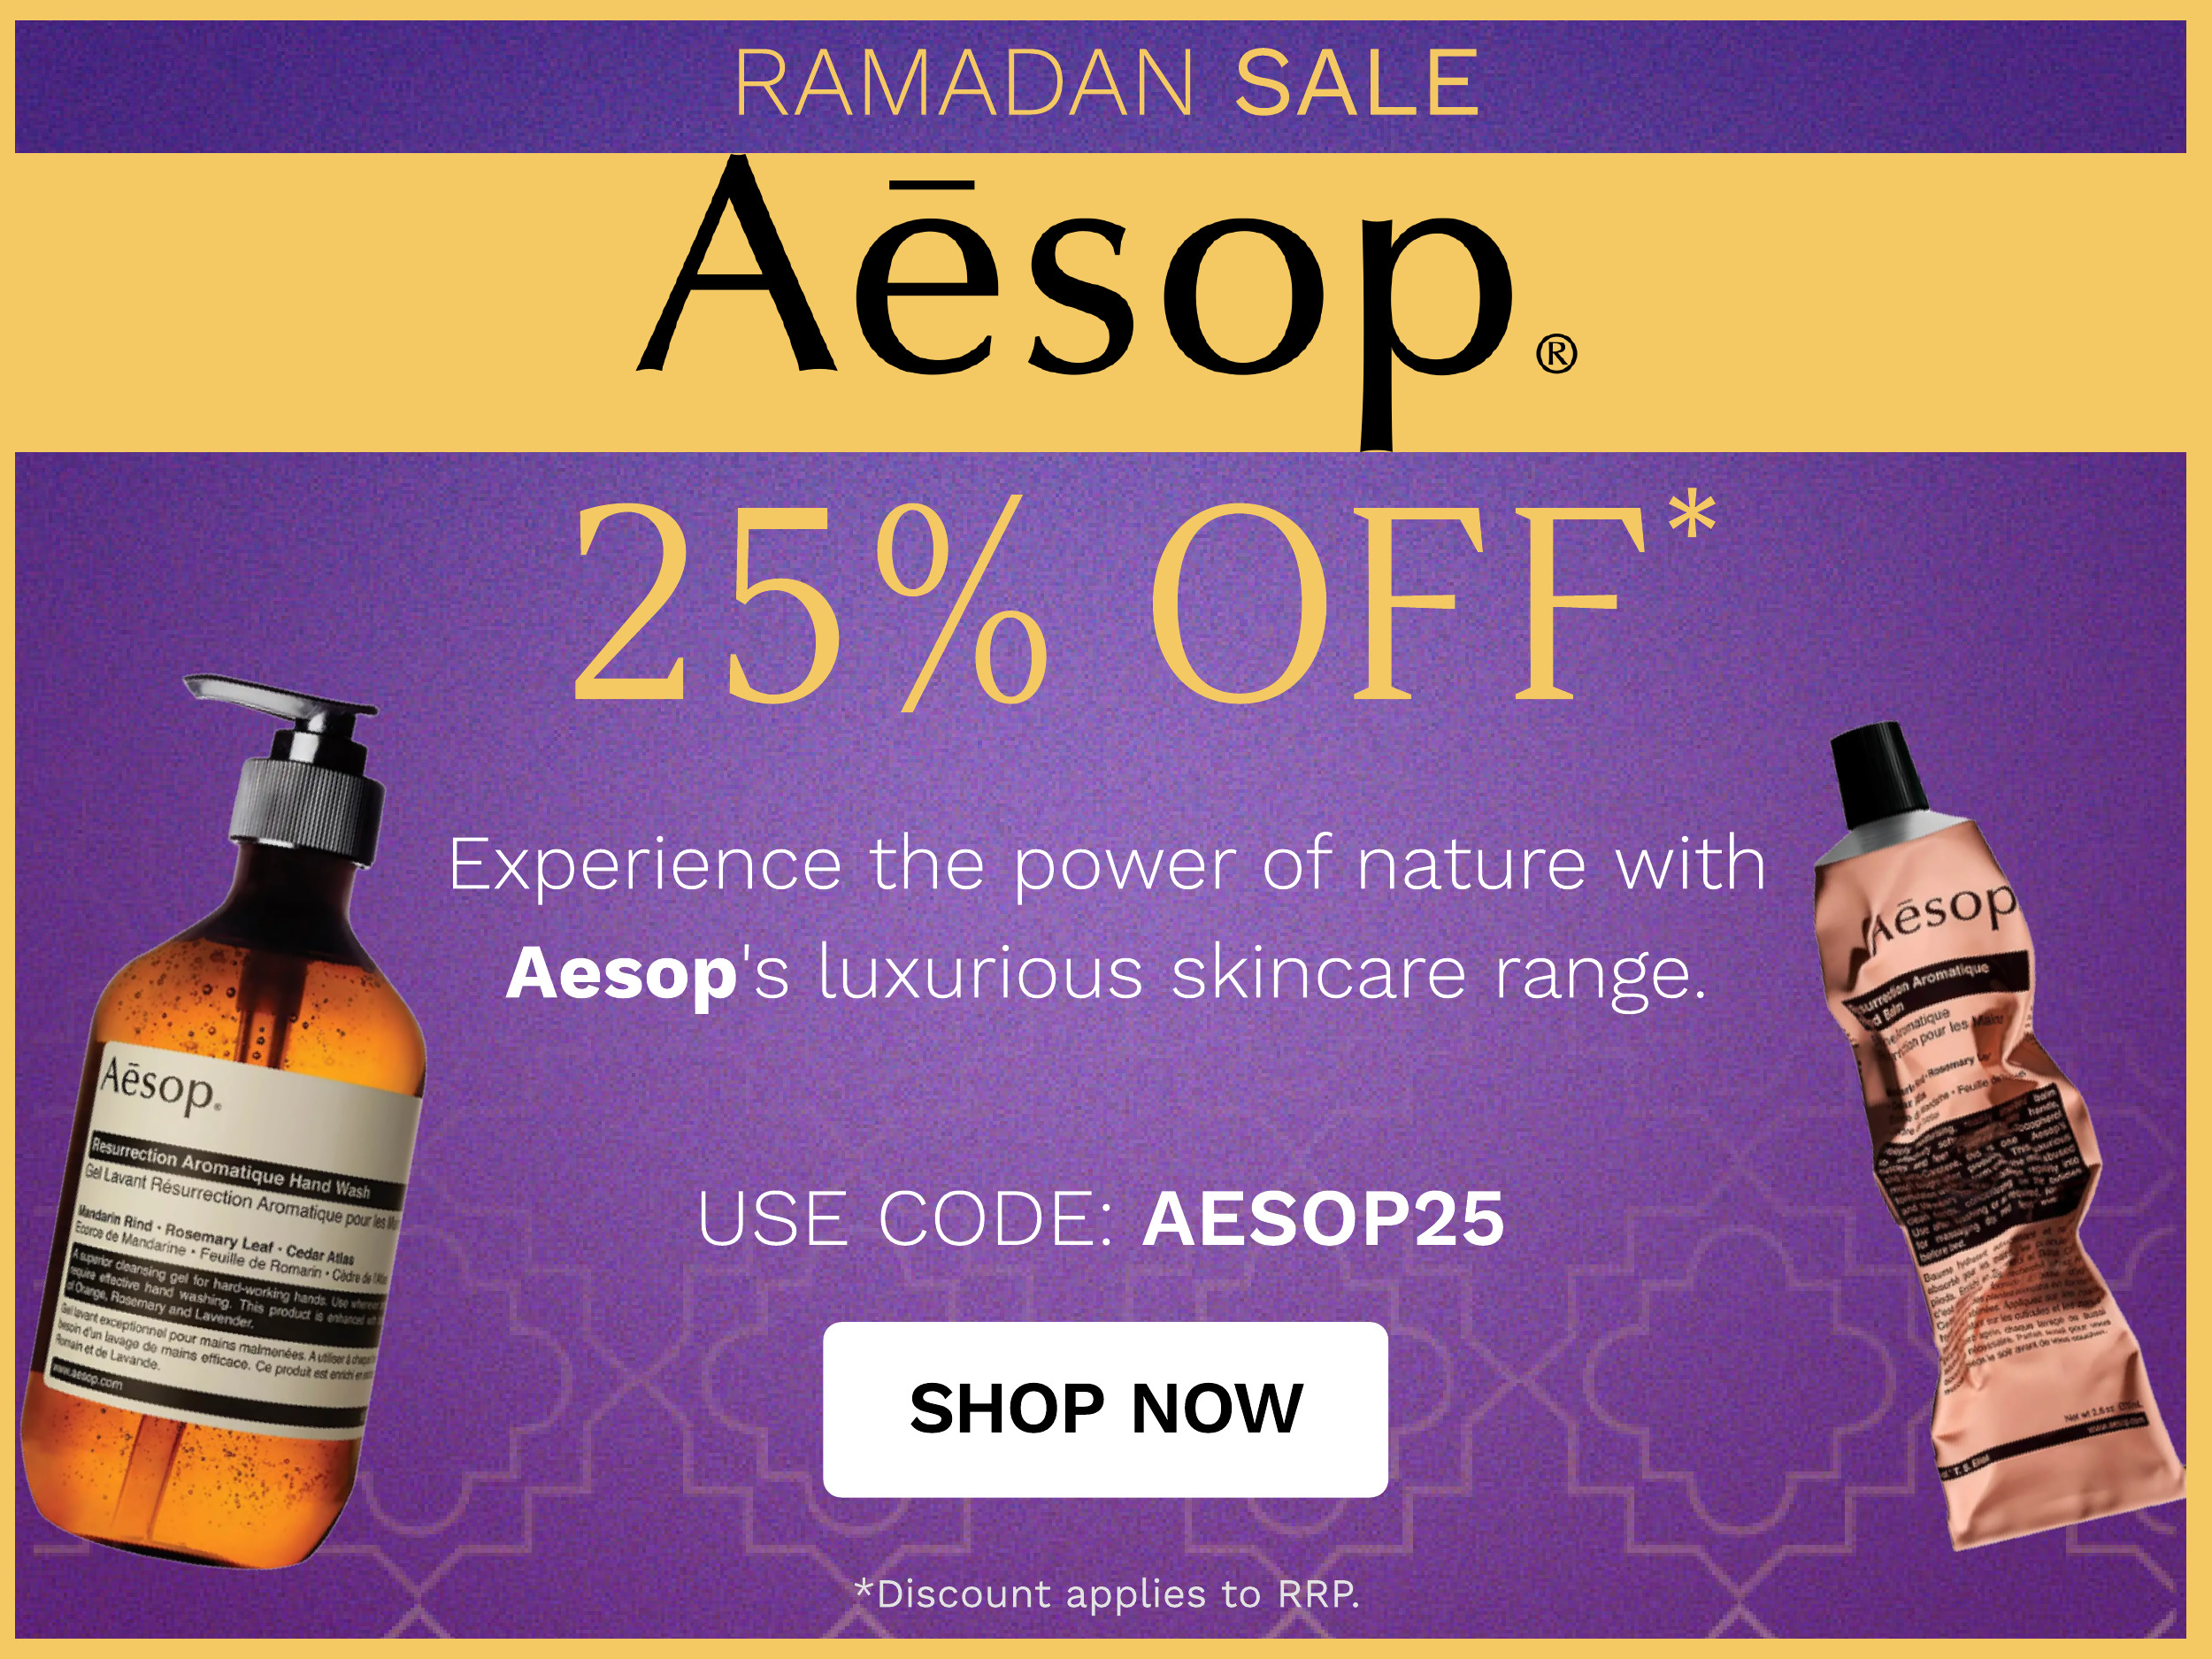 A i 25% OFF Experience the power of nature with Aesop's luxurious skincare range. USE CODE: AESOP25 SHOP NOW *Discount applies to RRP. 